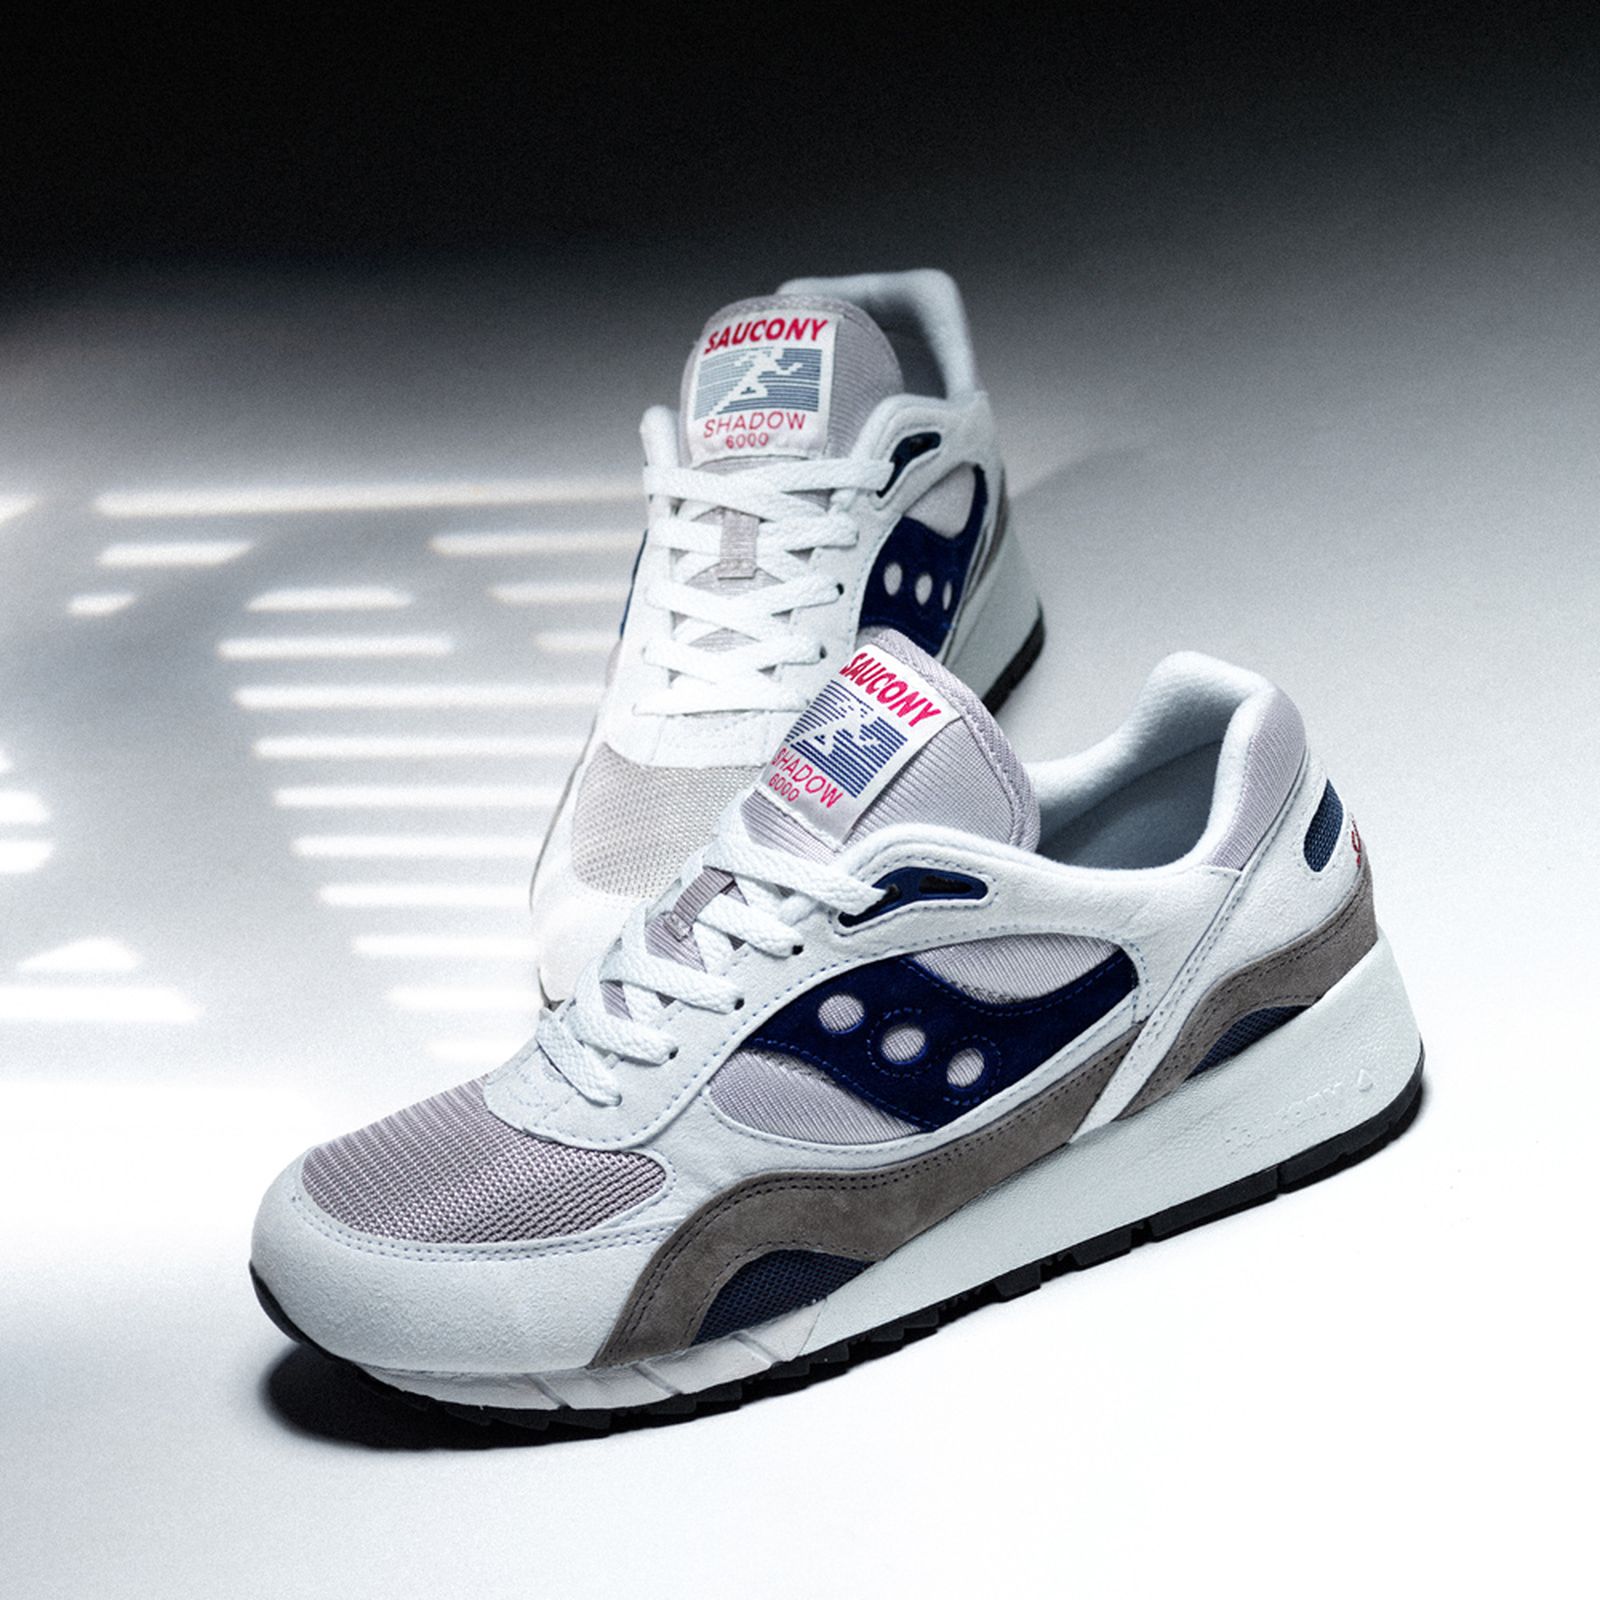 saucony-shadow-6000-relaunch-8